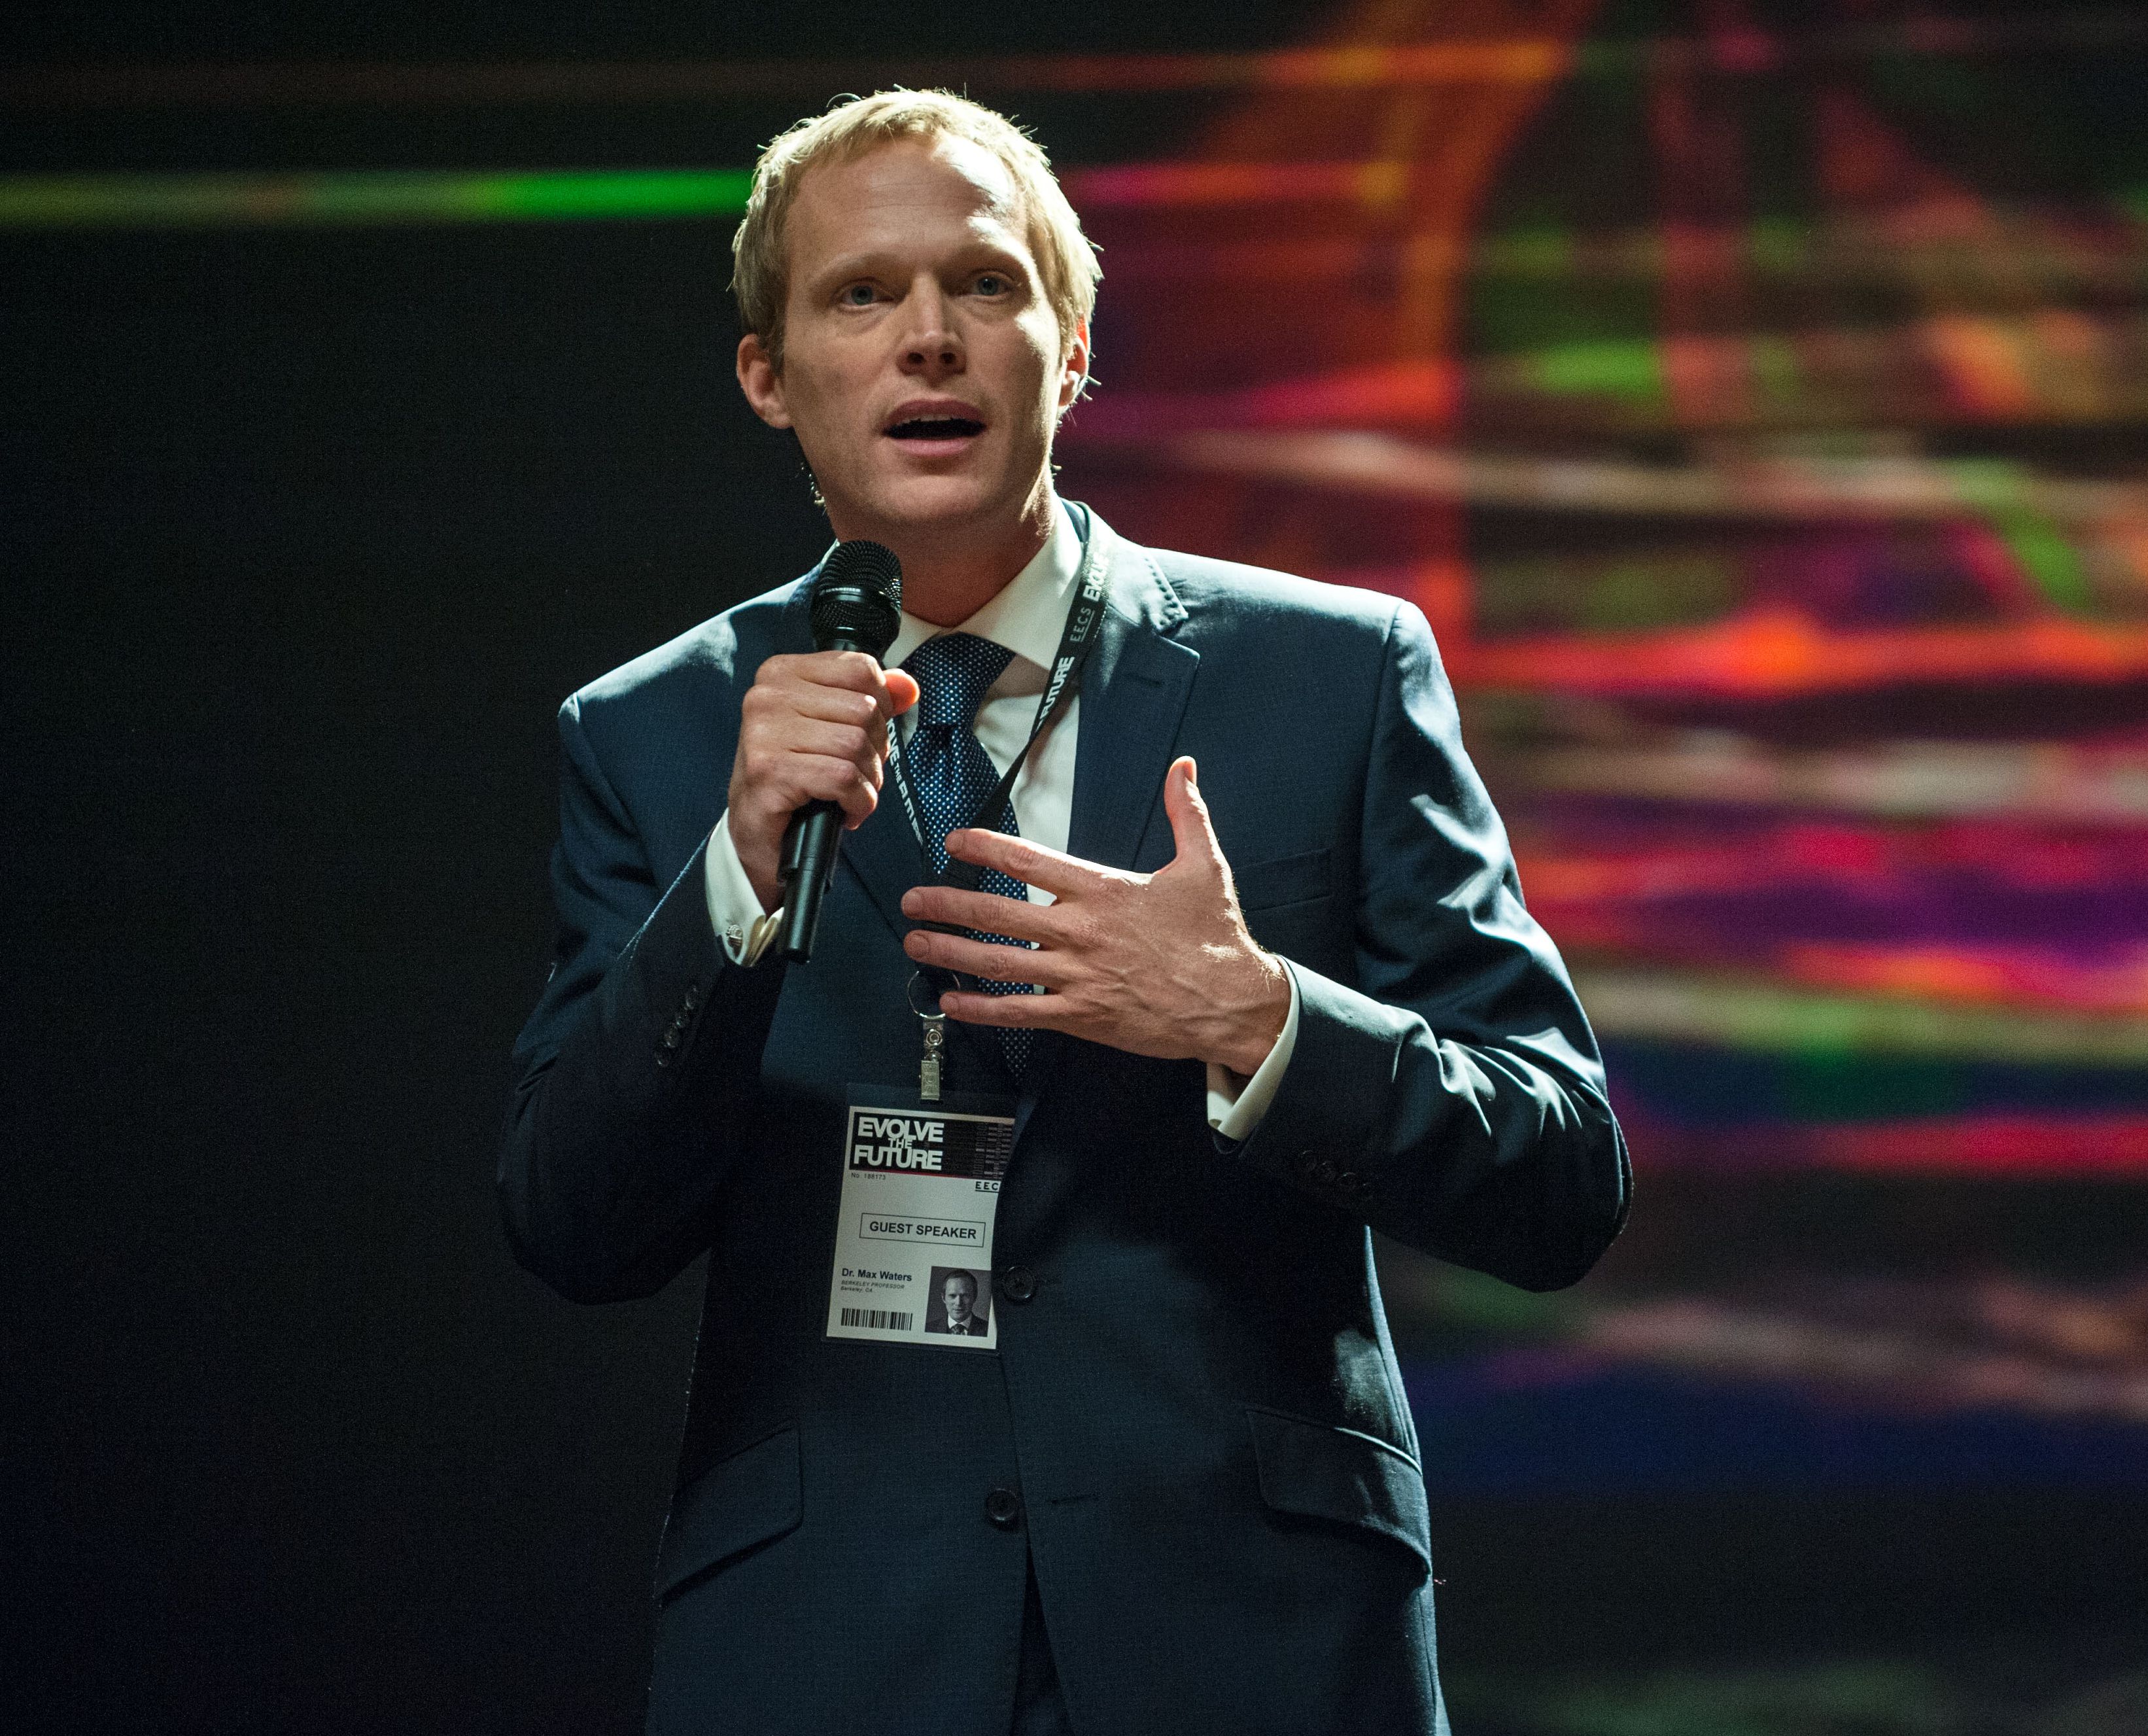 Paul Bettany speeching as Max Waters in Transcendence